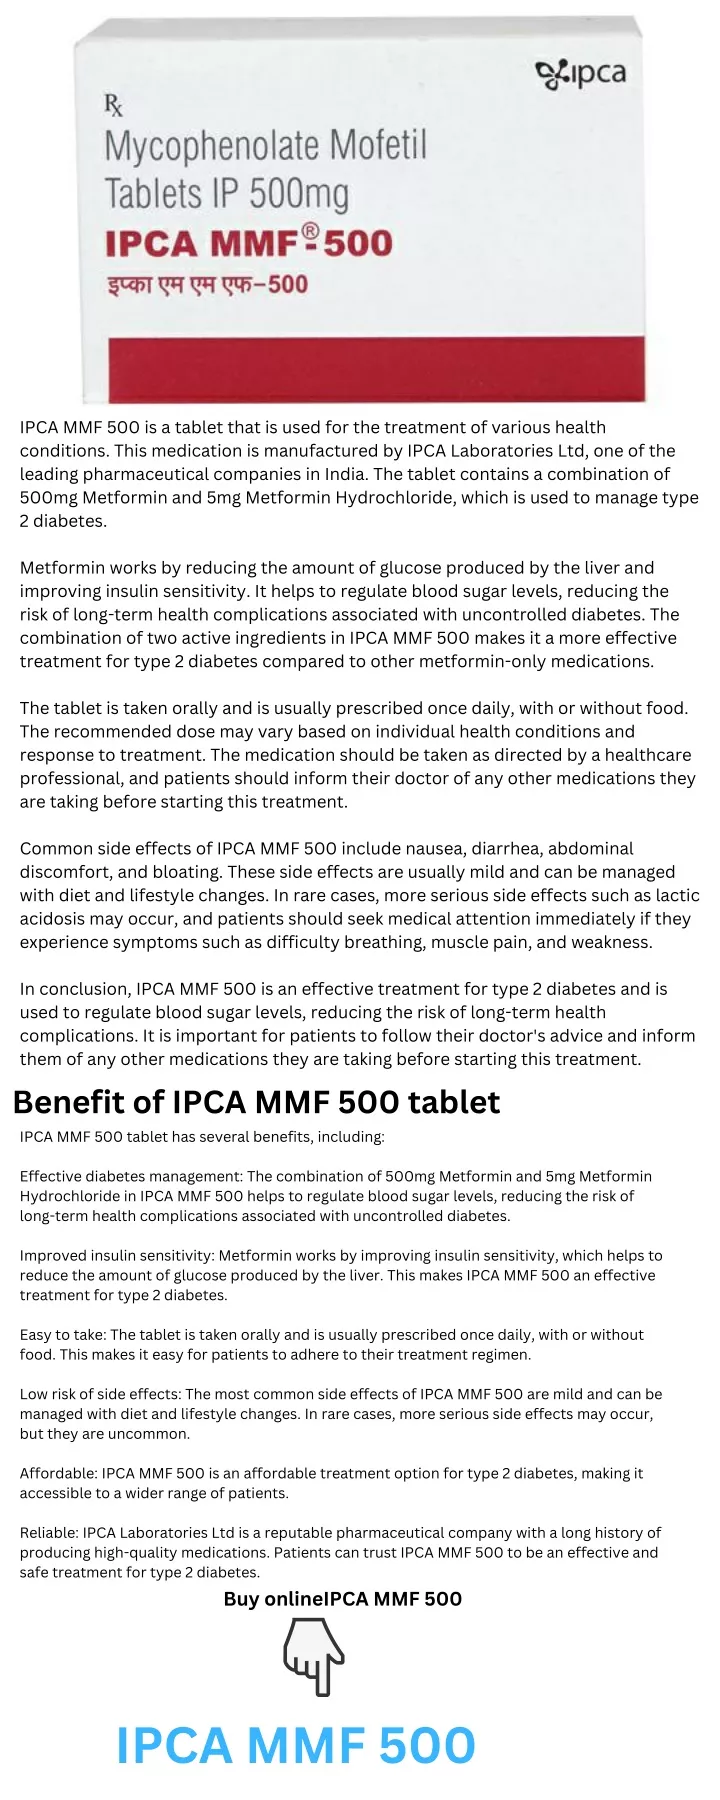 ipca mmf 500 is a tablet that is used